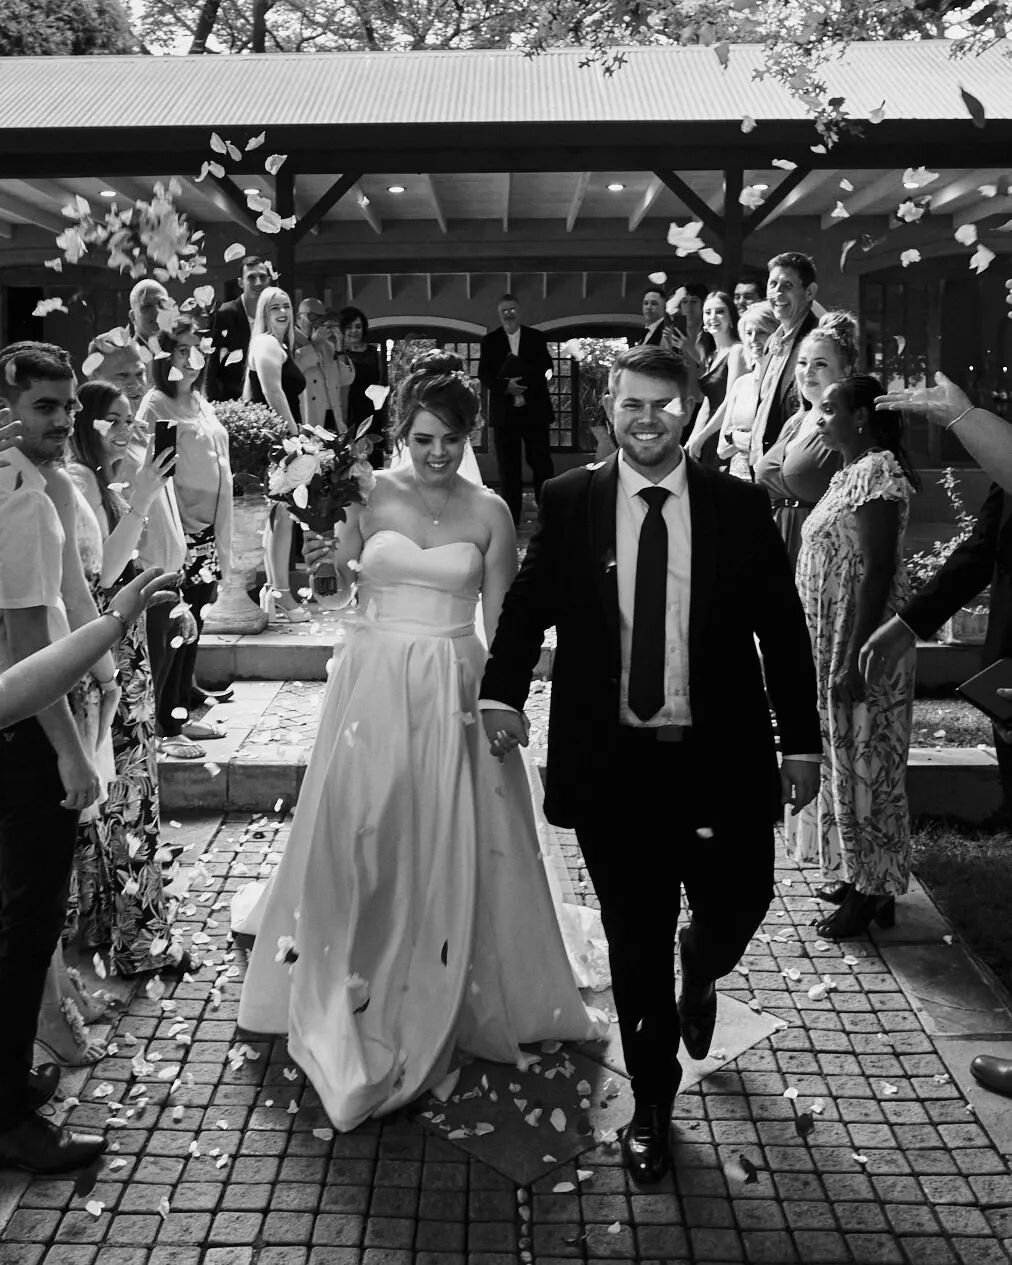 A few more from the lovely wedding of Christin &amp; Dillon. 

I still love wedding photos in black and white. It's just classic in my opinion. 

@christin_jade

#weddingphotographer
#weddingphotos
#weddingphotography
#brideandgroom 
#couplesphotogra